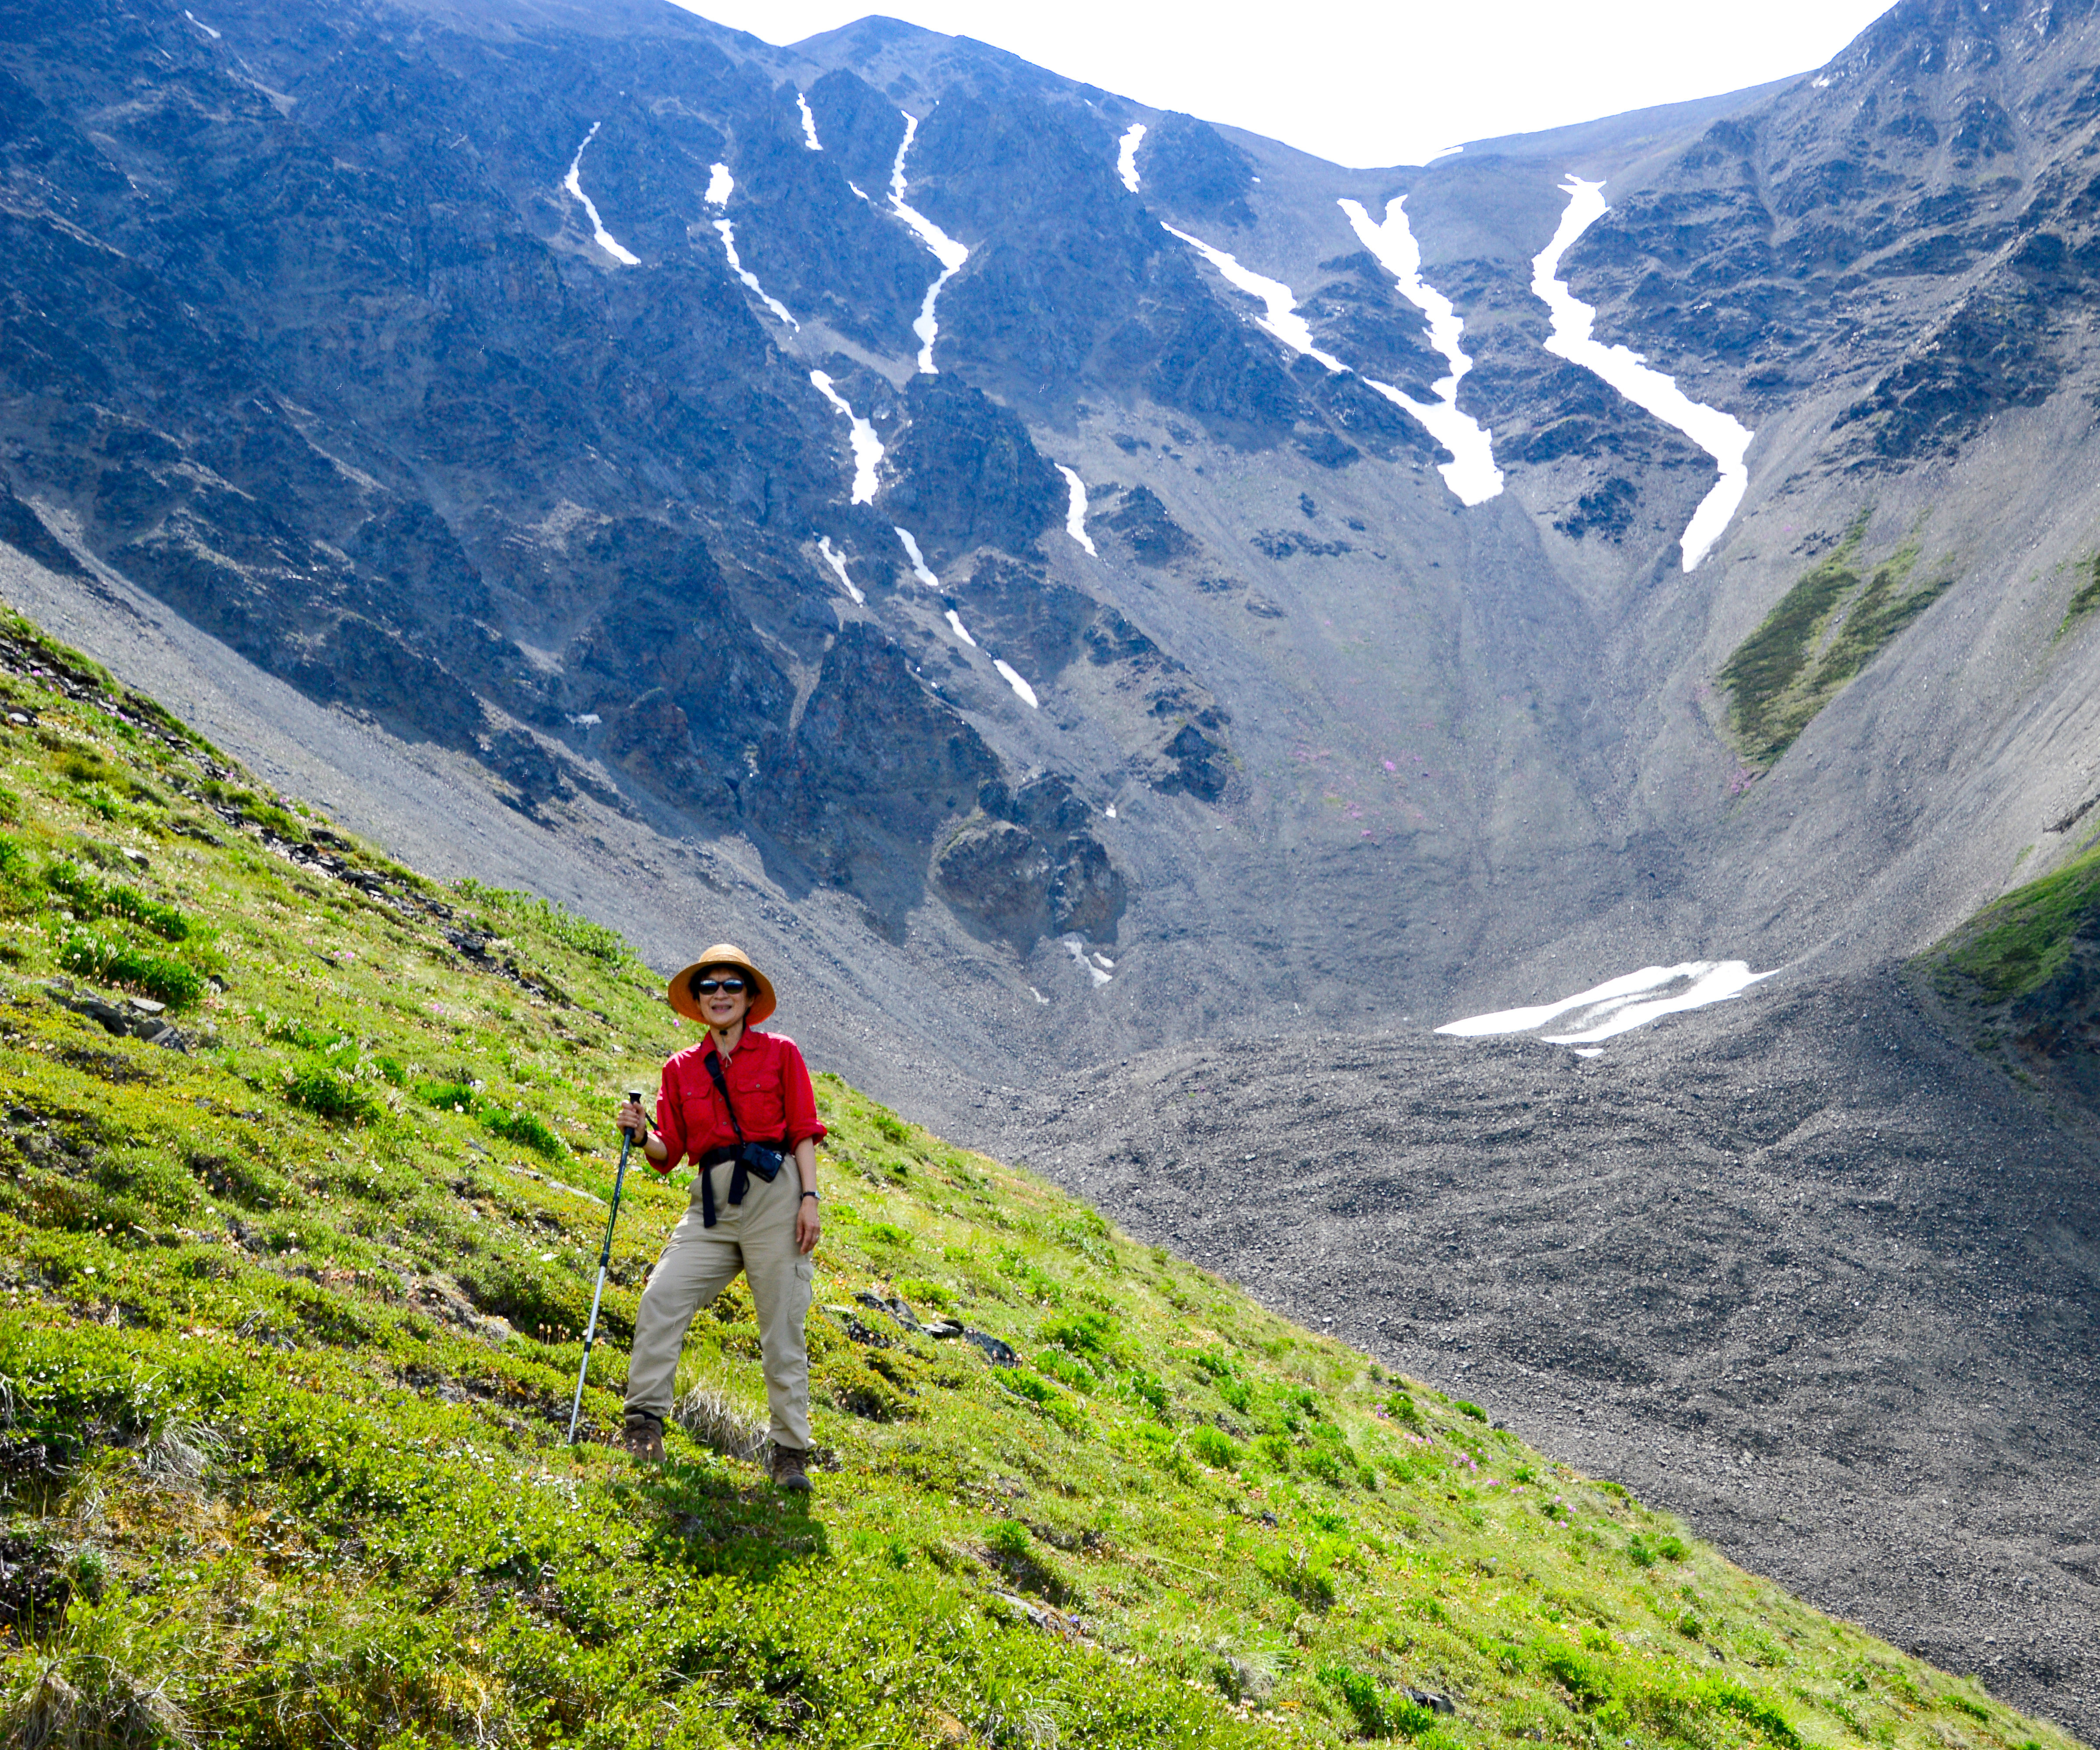 Hike Like a Pro With These 6 Tips